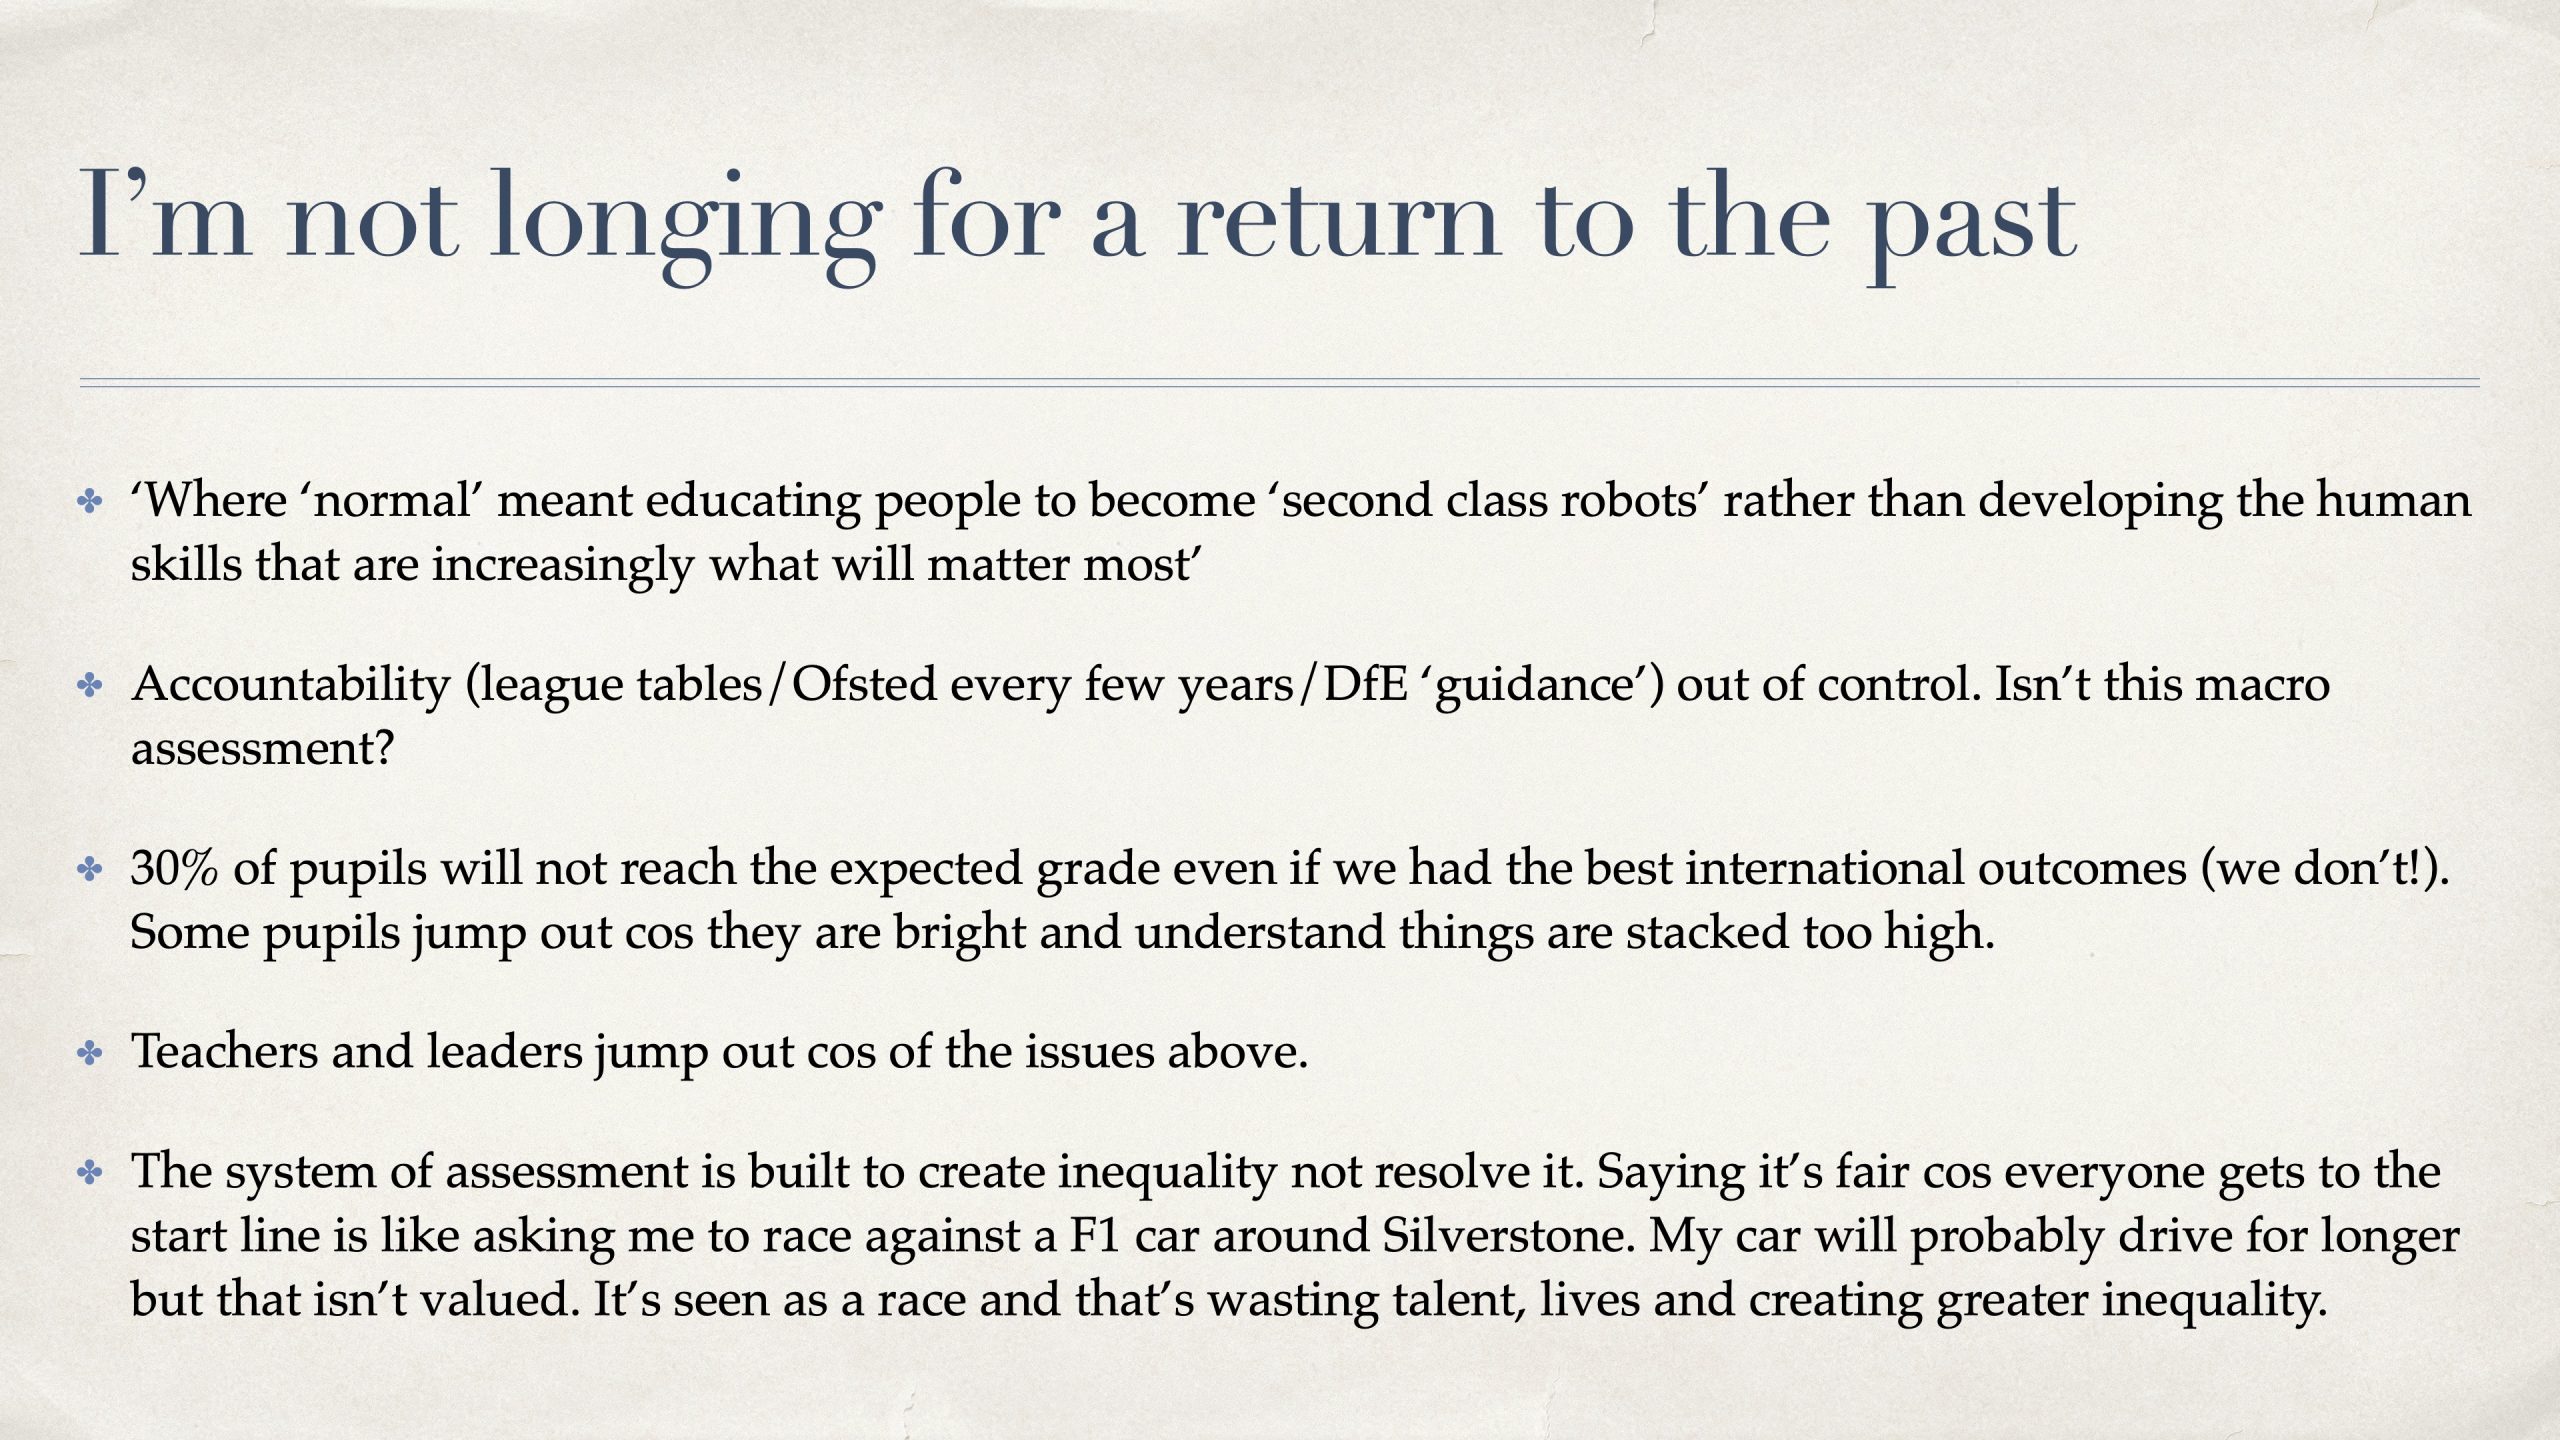 Slide 3. I'm not longing for a return to the past